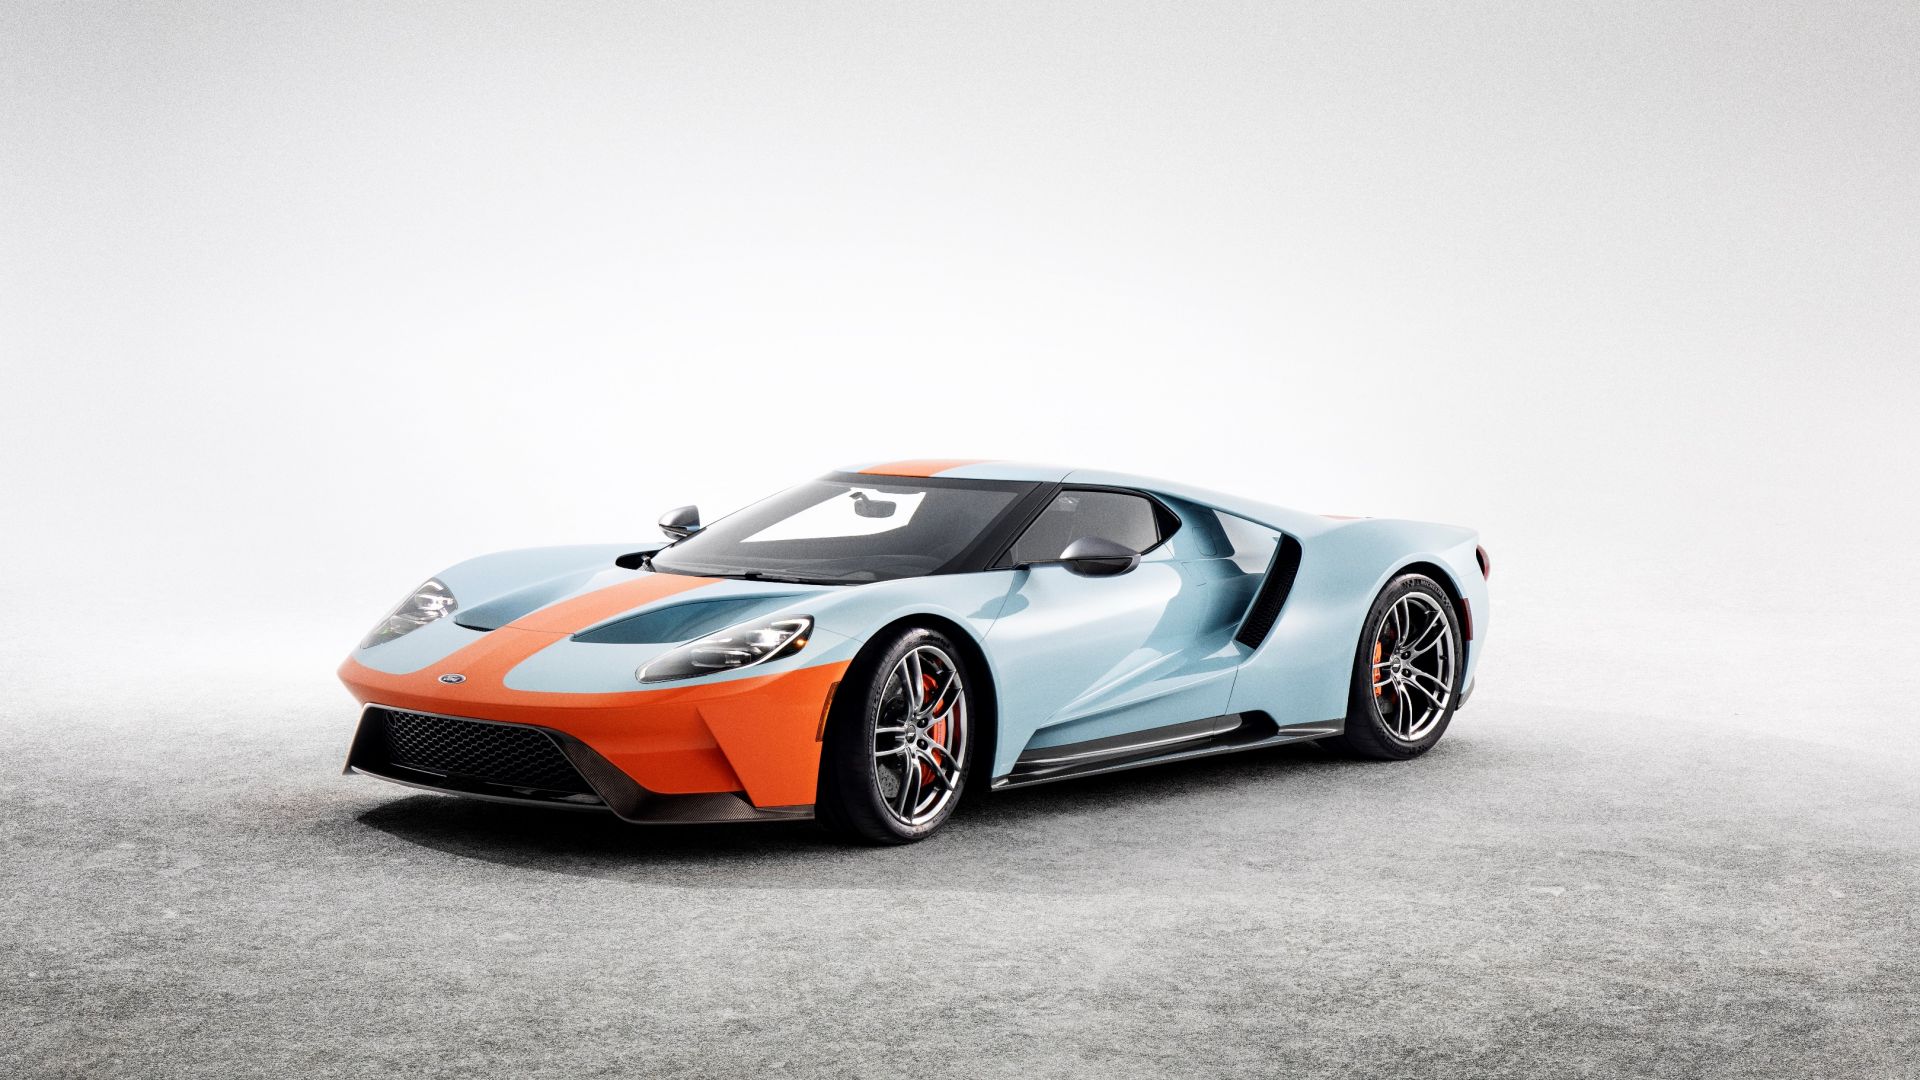 Ford GT Heritage Edition, 2019 Cars, supercar, 4K (horizontal)